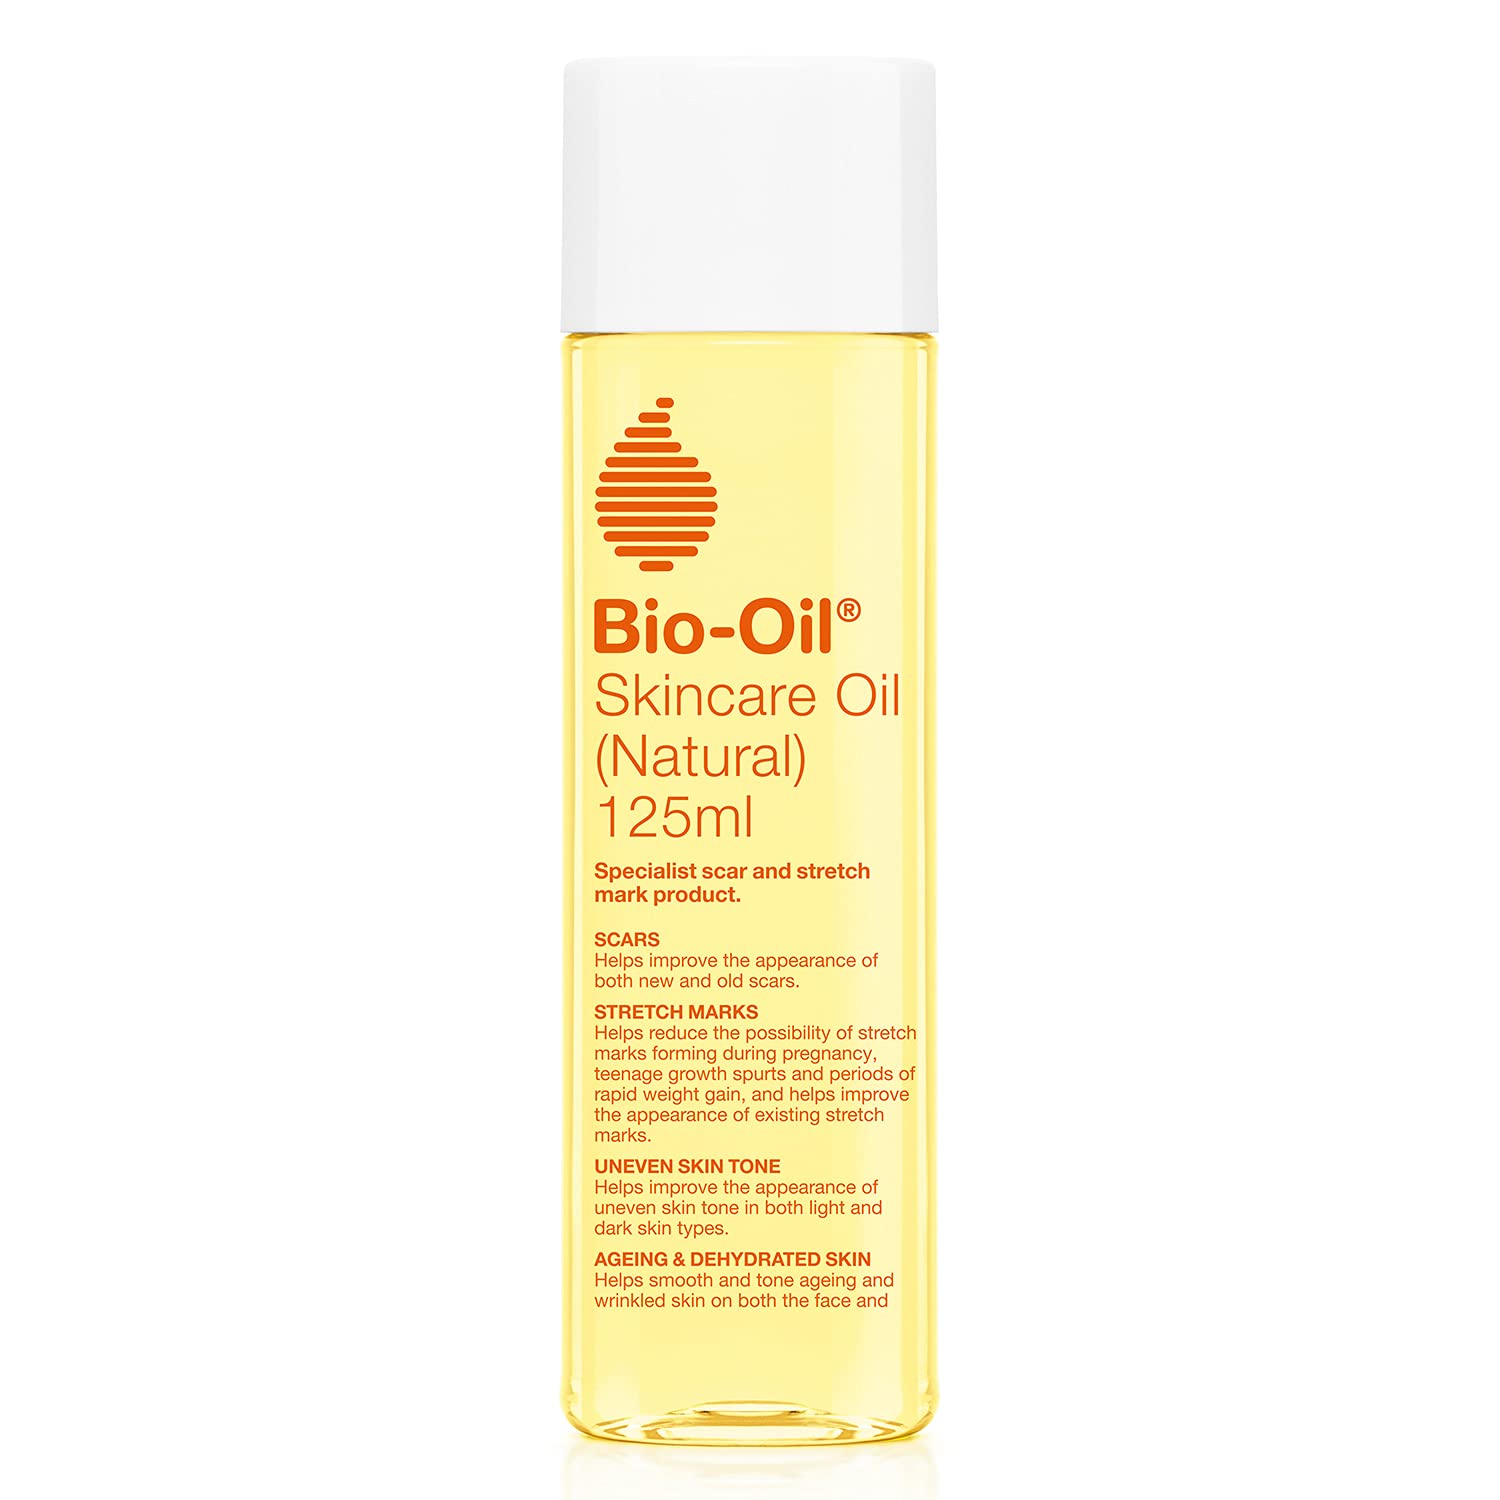 NEW Bio-Oil Natural Skincare Oil - 100% Natural Formulation - Improve the Appearance of Scars, Stretch Marks and Uneven Skin Tone - 1 x 125 ml